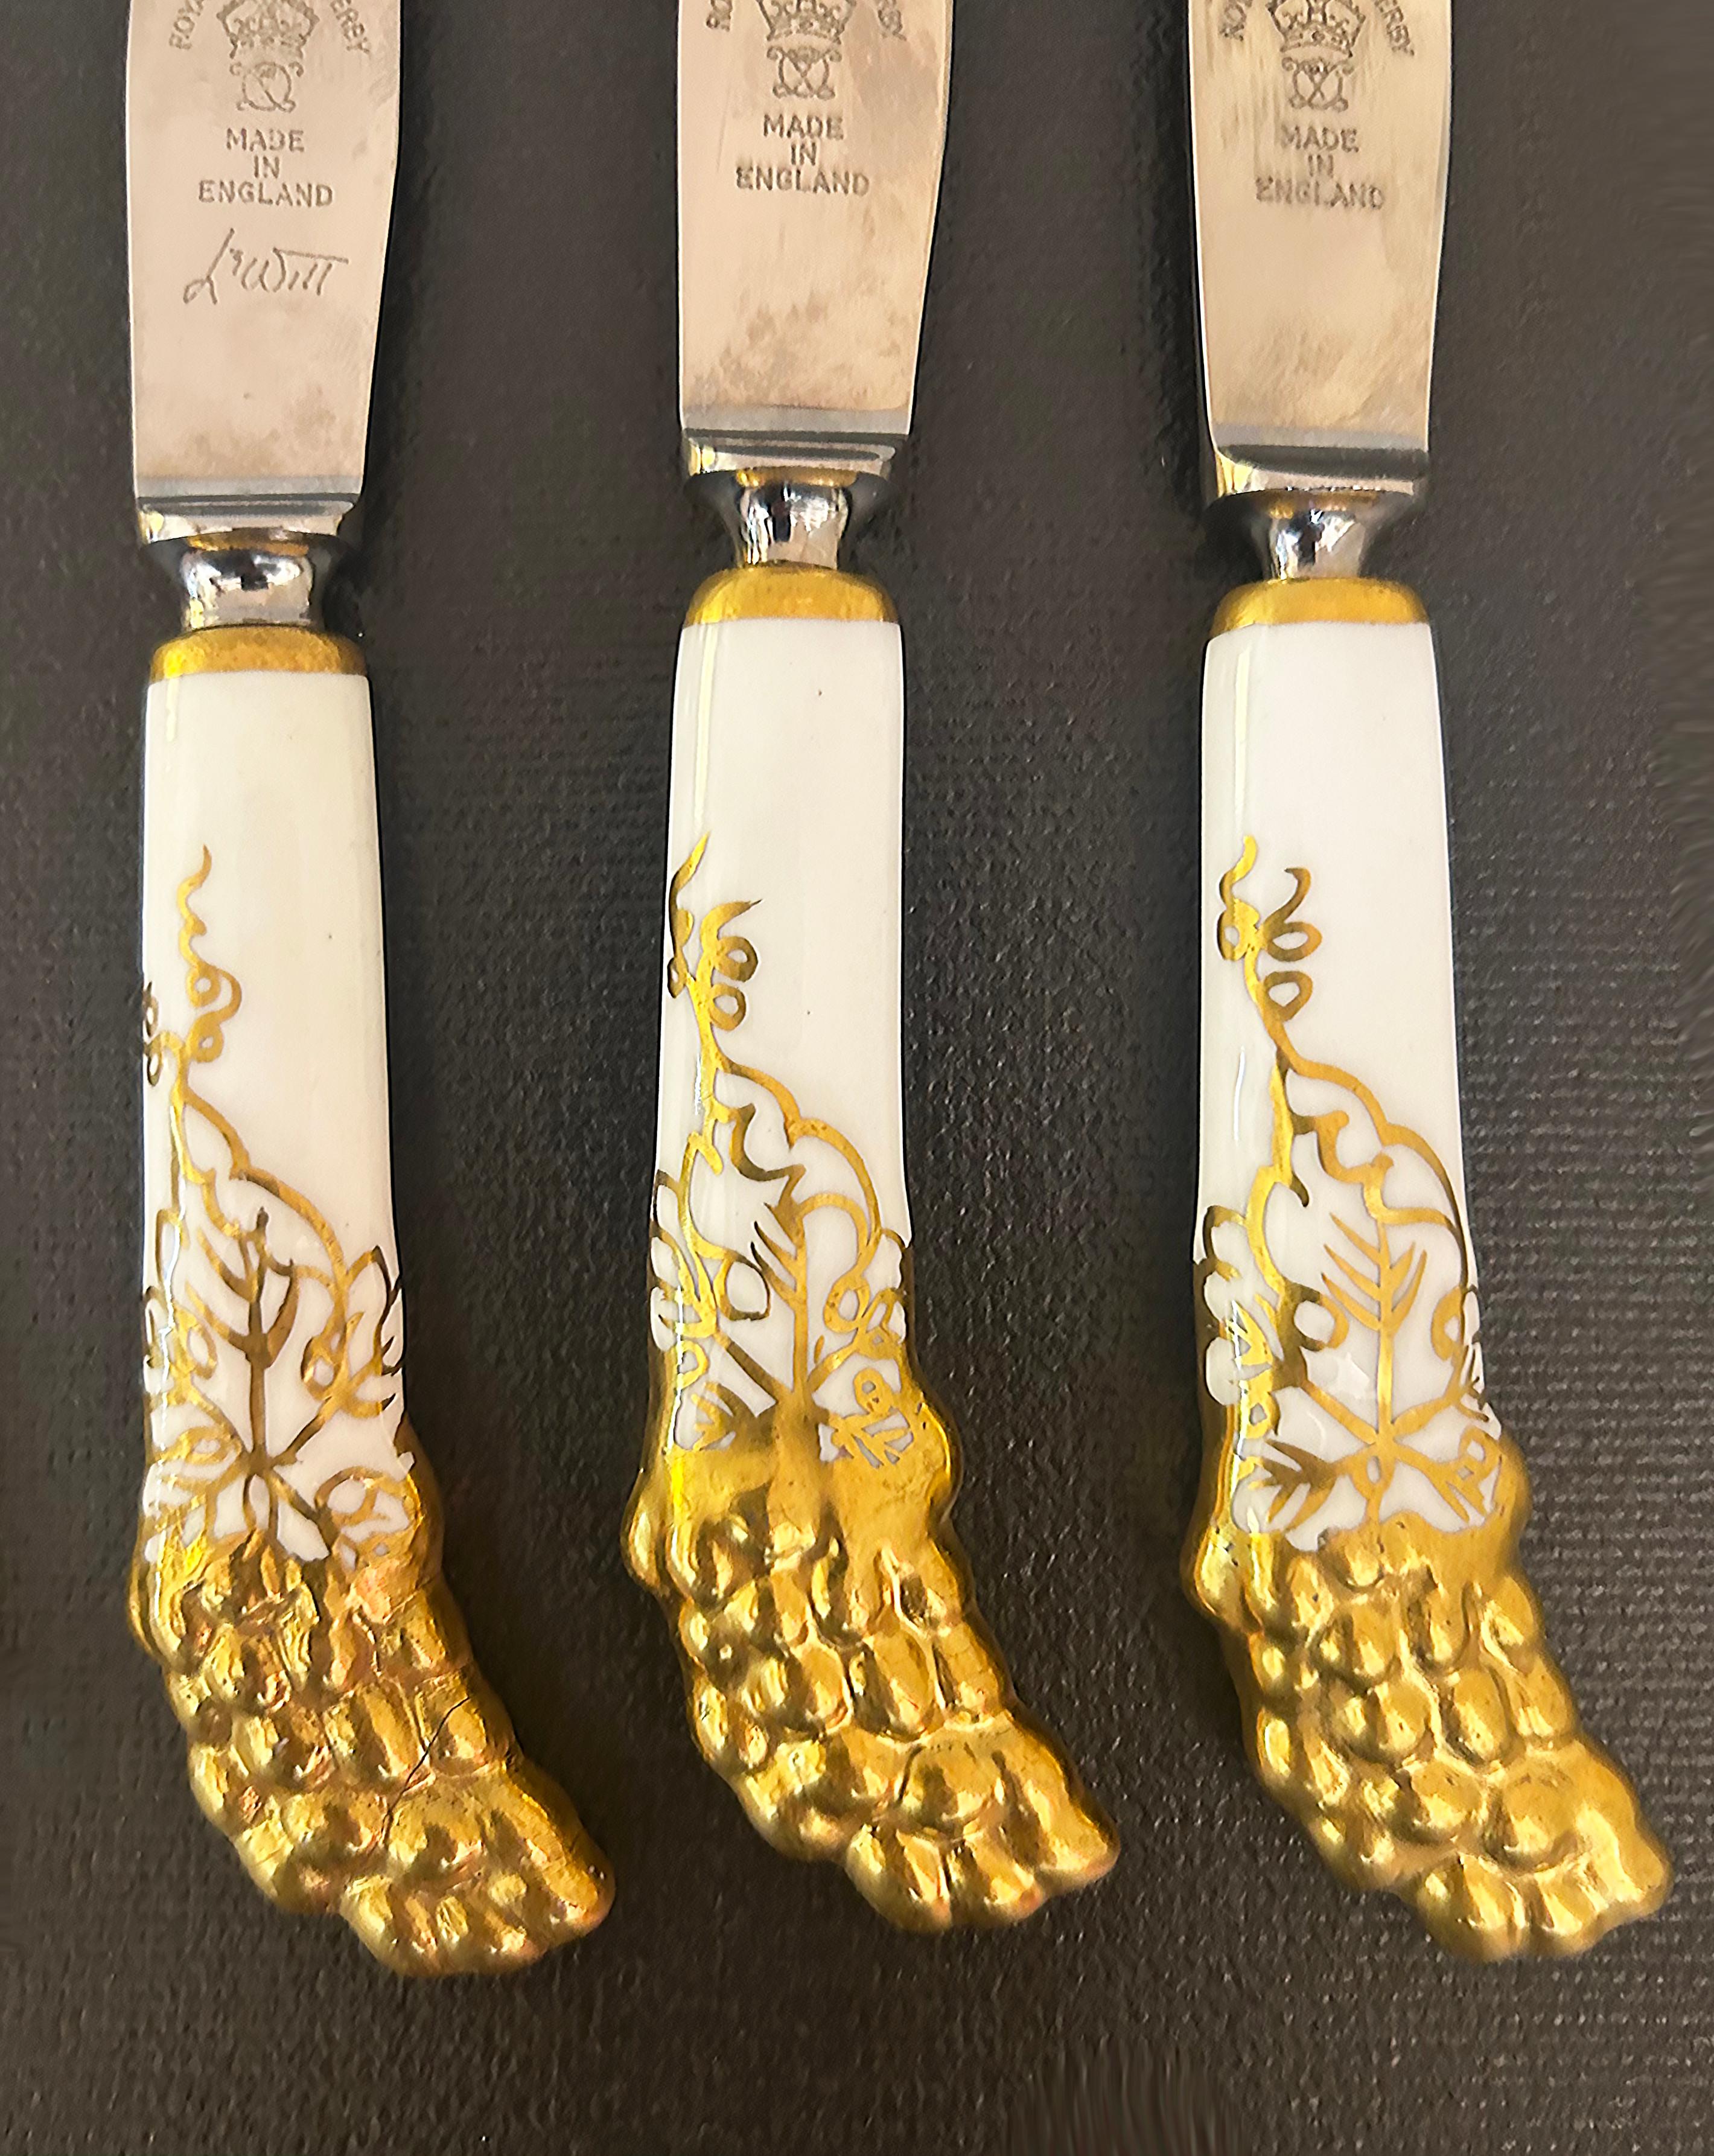 Royal Crown Derby Porcelain, Stainless Fruit Knives Set, Grapes, Leather Box In Good Condition For Sale In Miami, FL